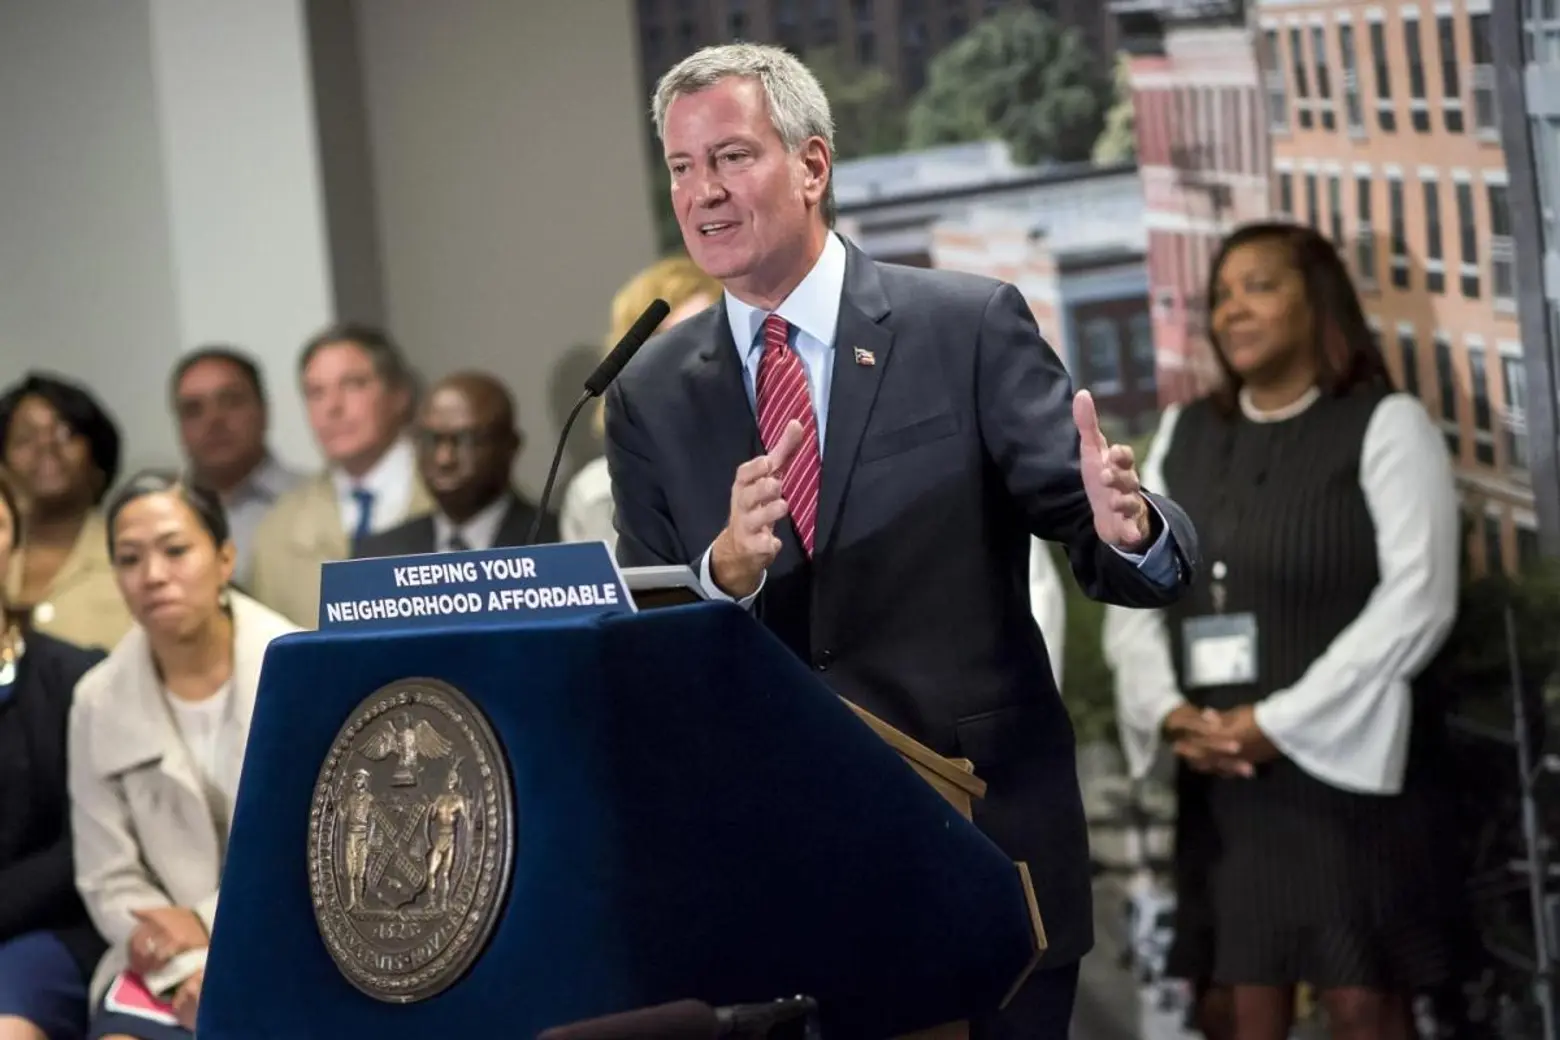 De Blasio launches new programs to make affordable homeownership easier for New Yorkers